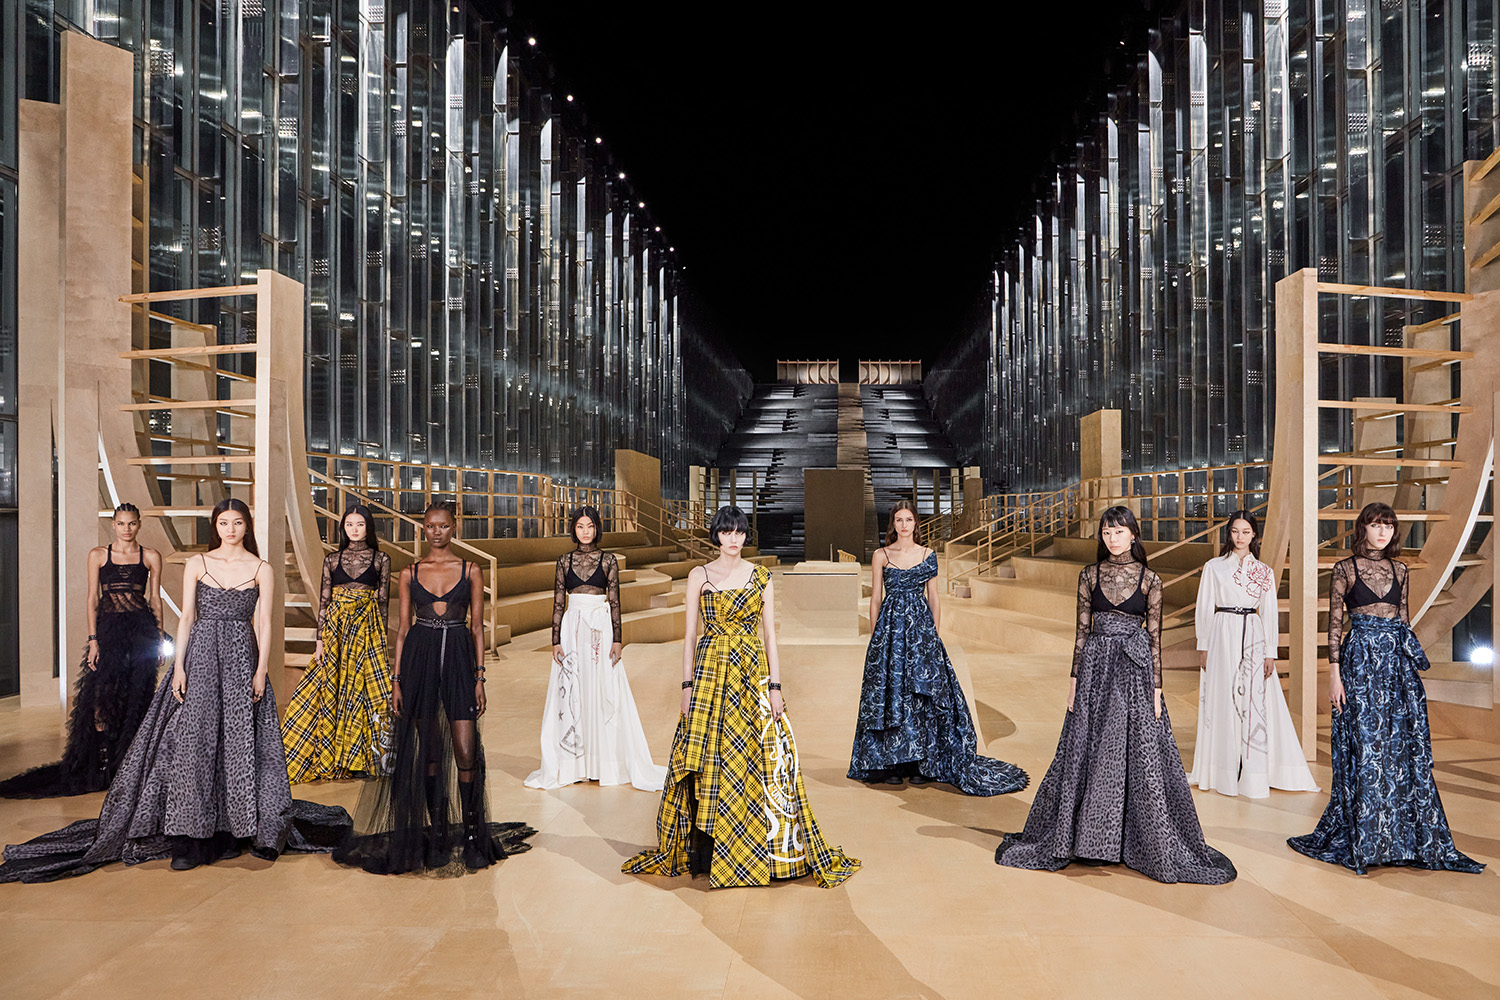 Dior's Cruise 2022 Collection Focuses on Rethinking the Purpose of